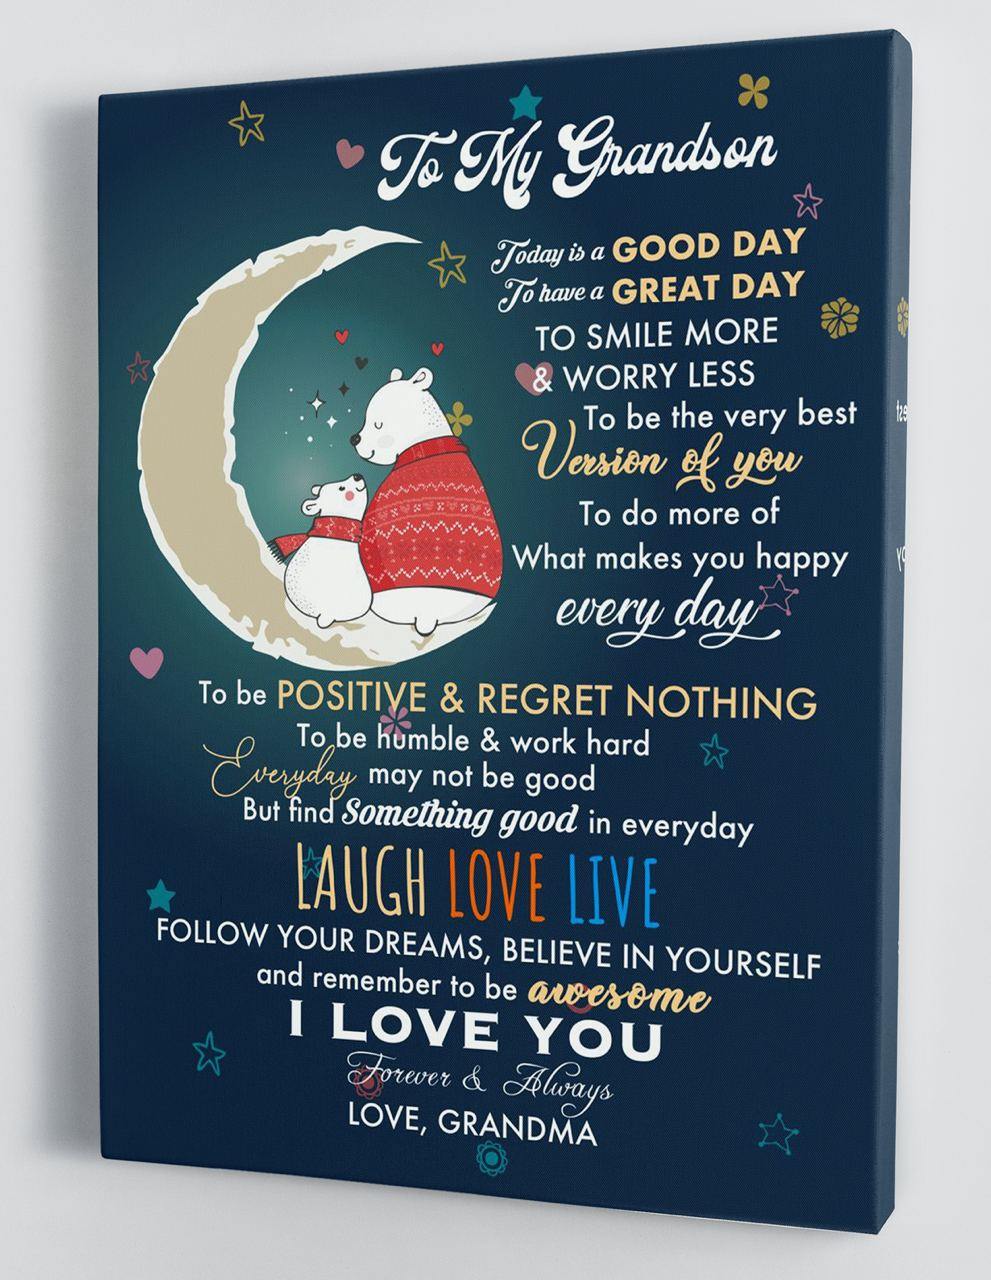 To My Grandson - From Grandma - Christmas, Father's Day, Mother's Day Canvas Gift GMS057 - DivesArt LLC